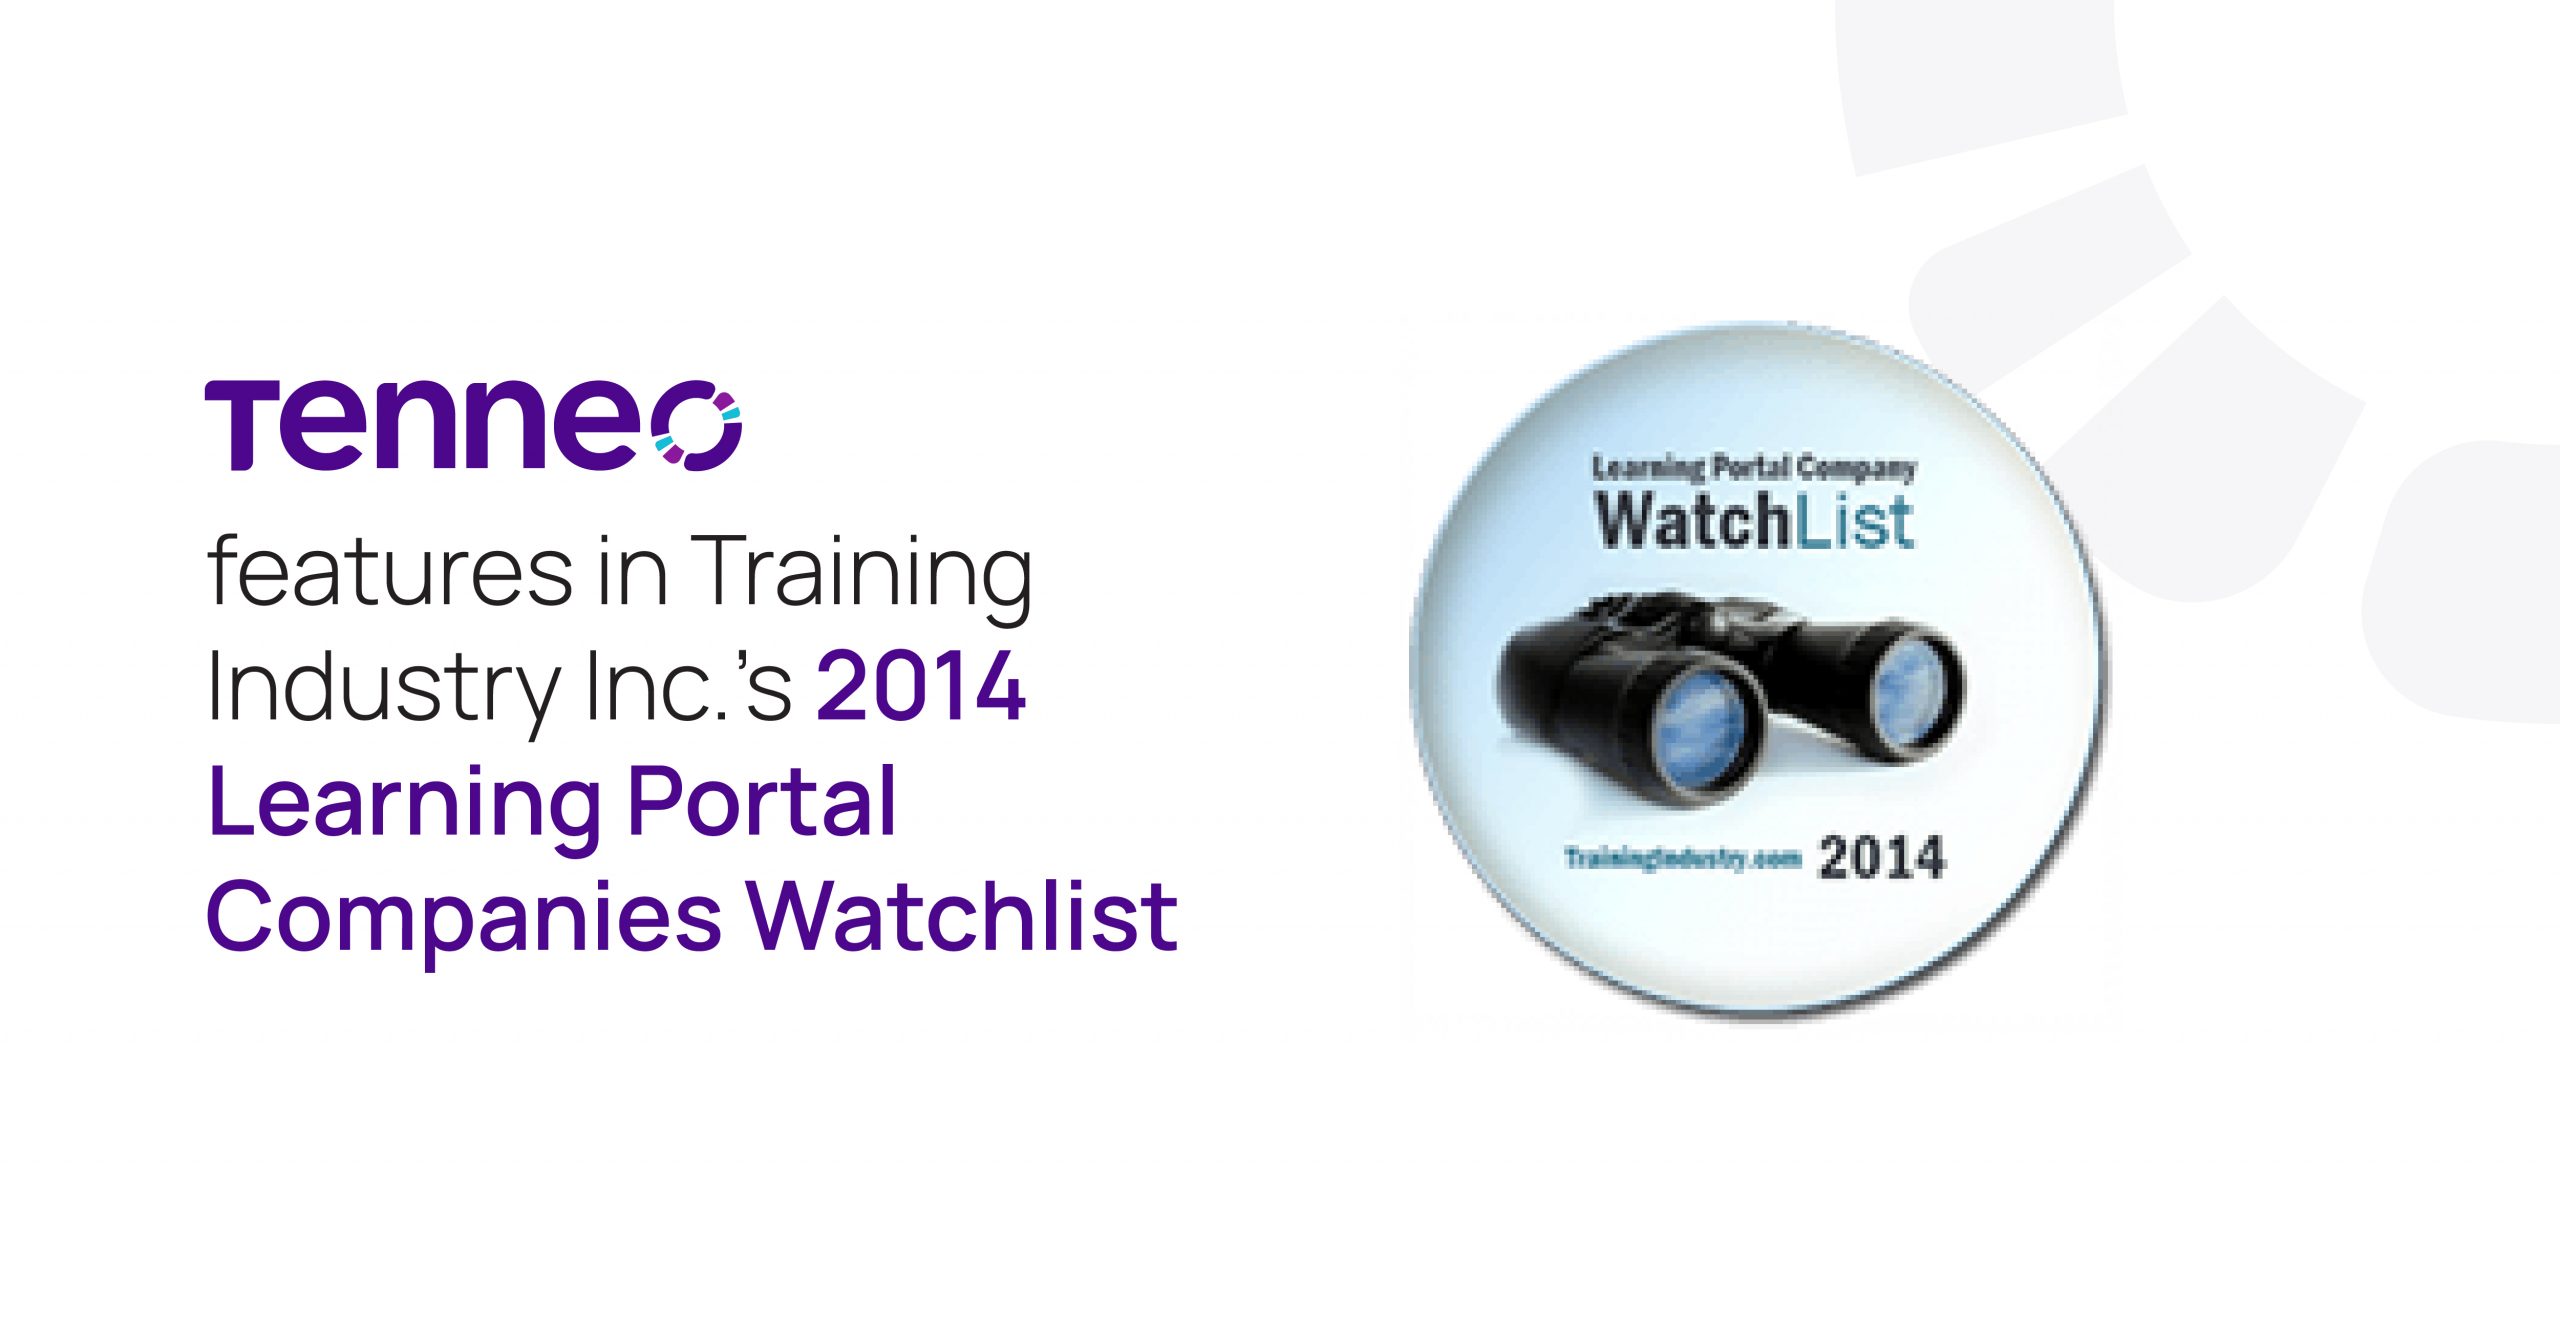 Tenneo features in Training Industry Inc.’s 2014 Learning Portal Companies Watchlist-01